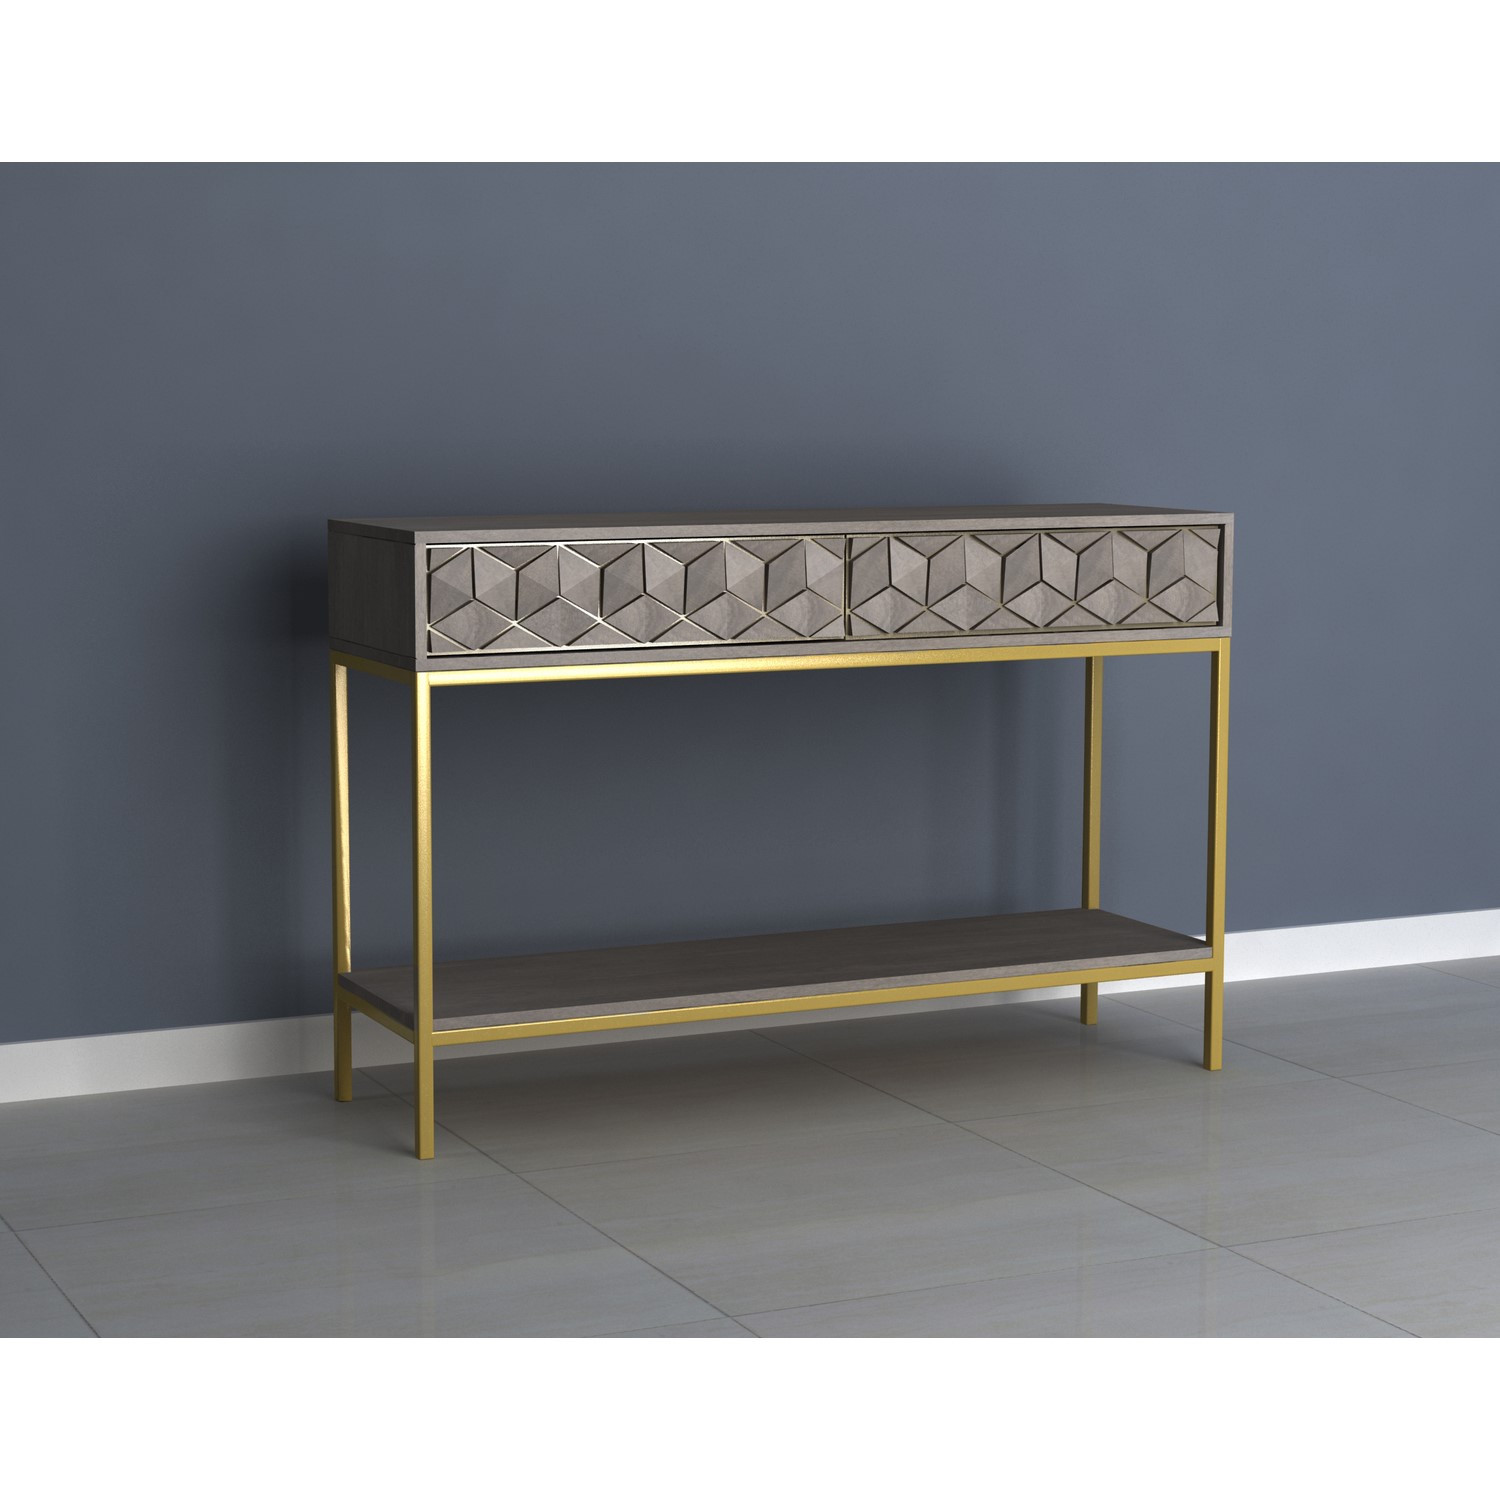 Photo of Mango wood console table with gold legs - alice